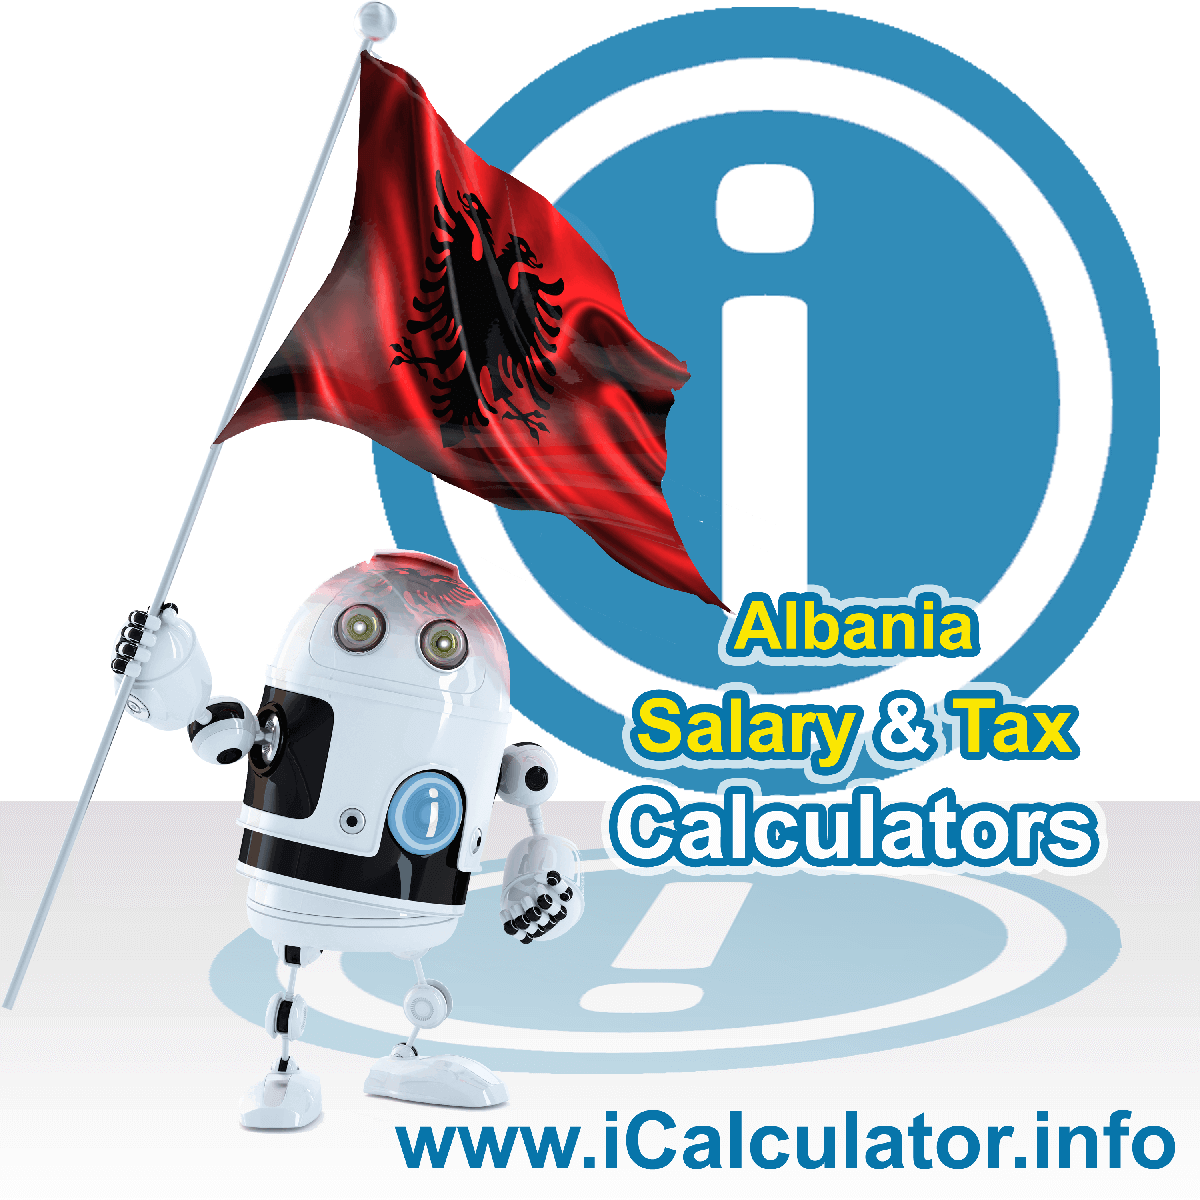 Albania Salary Calculator. This image shows the Albaniaese flag and information relating to the tax formula for the Albania Tax Calculator